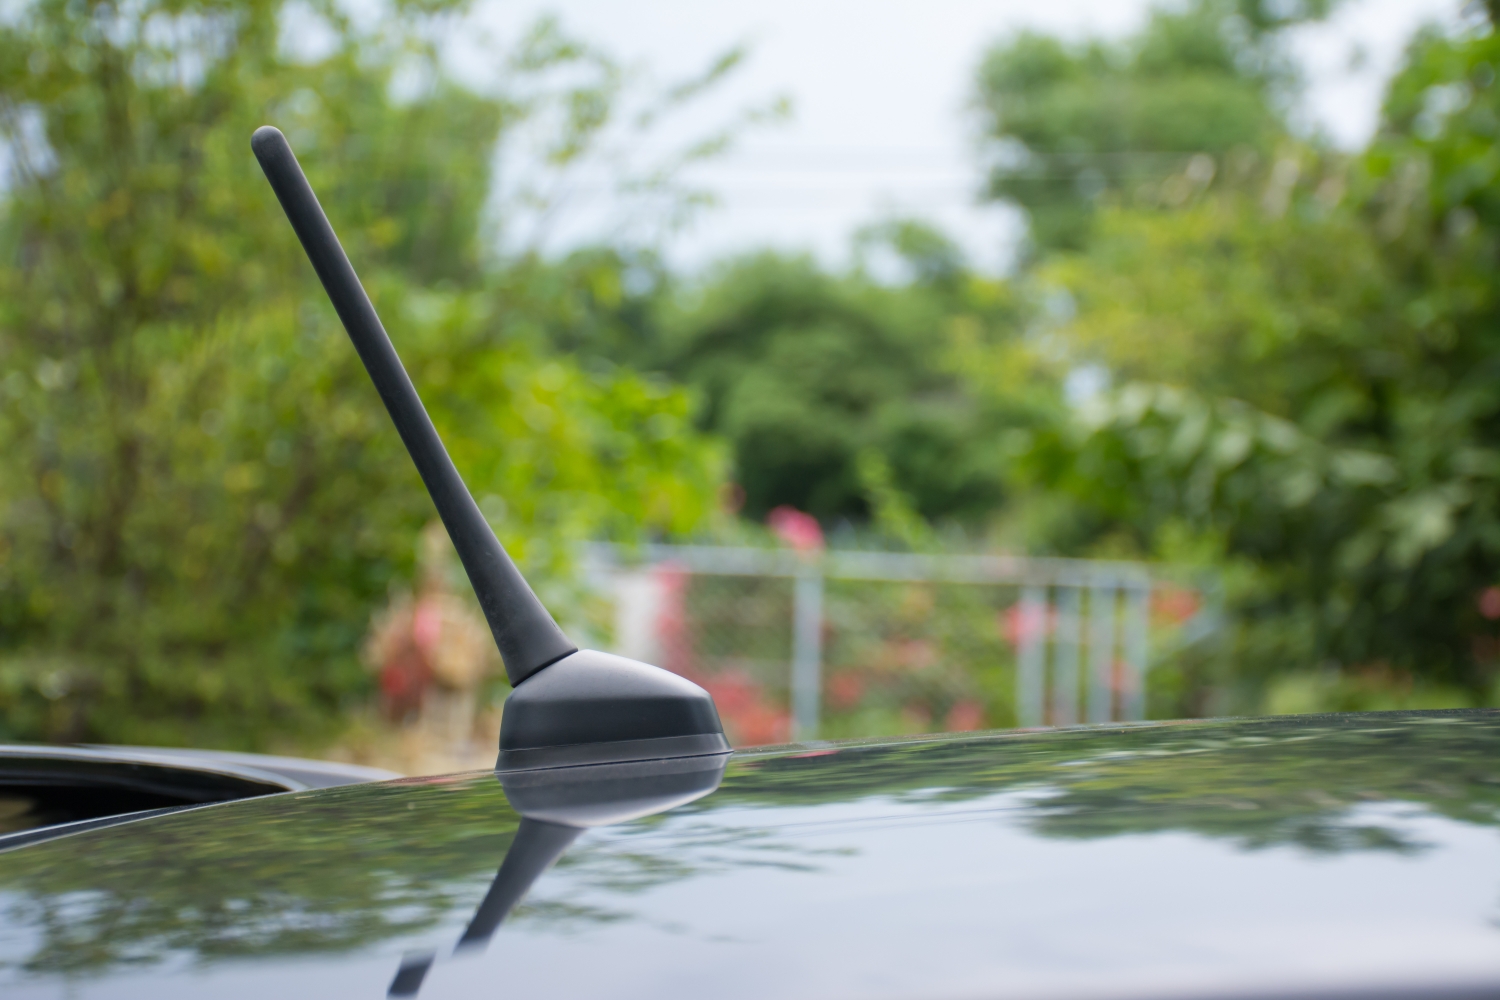 The Fishing Pole Antenna Cover is a decorative invention that adds a unique touch to a vehicle’s antenna.